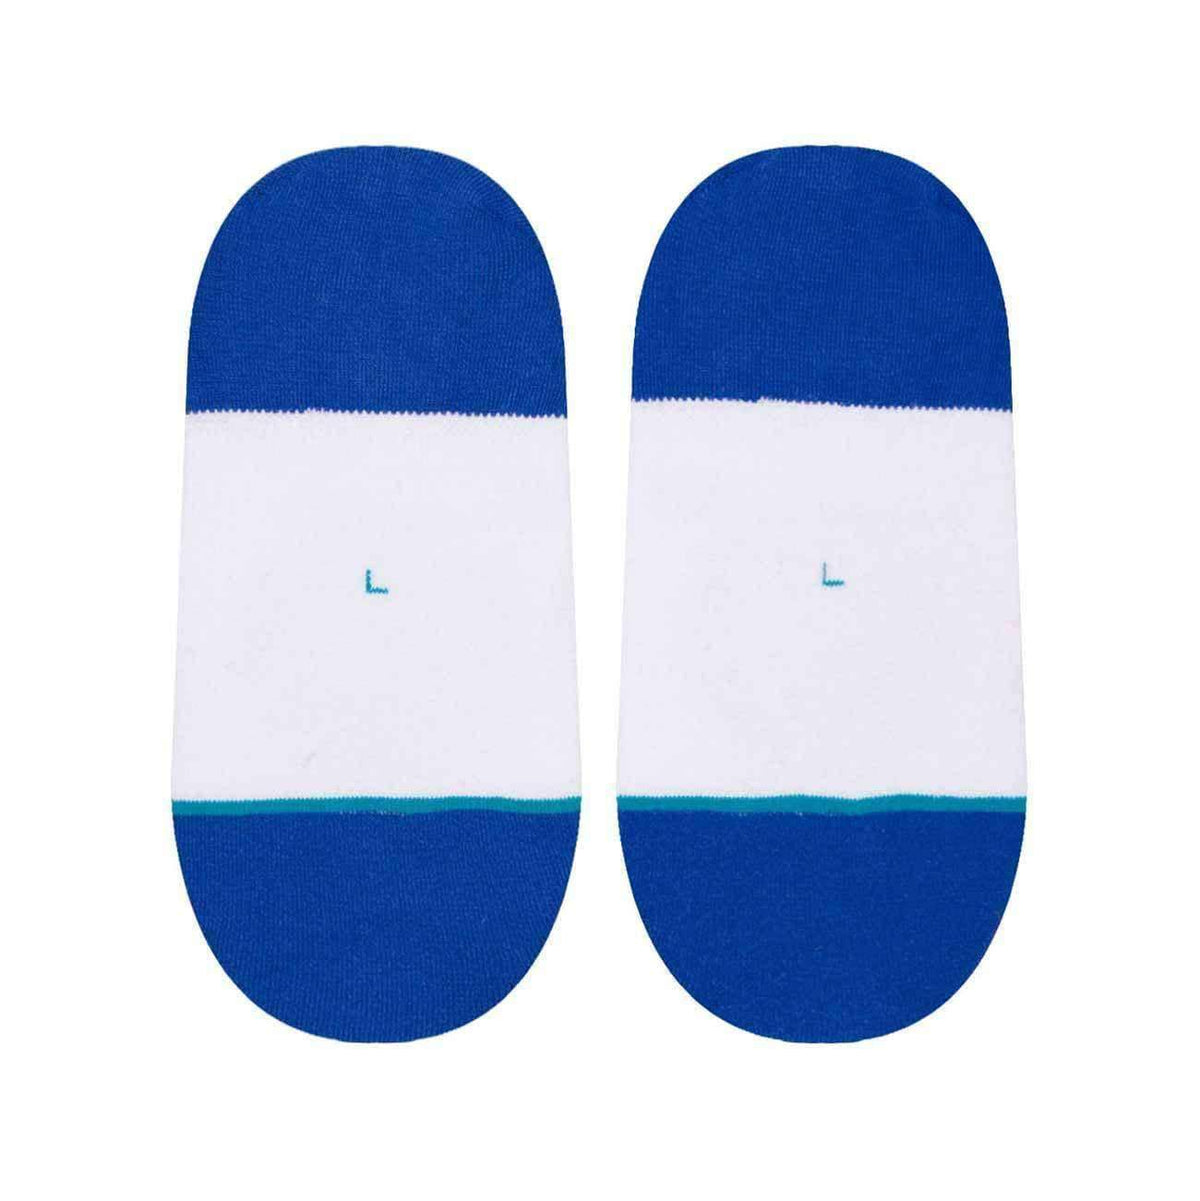 Stance NBA Arena Warriors Invisible Low Socks in White Mens Low/Ankle Socks by Stance